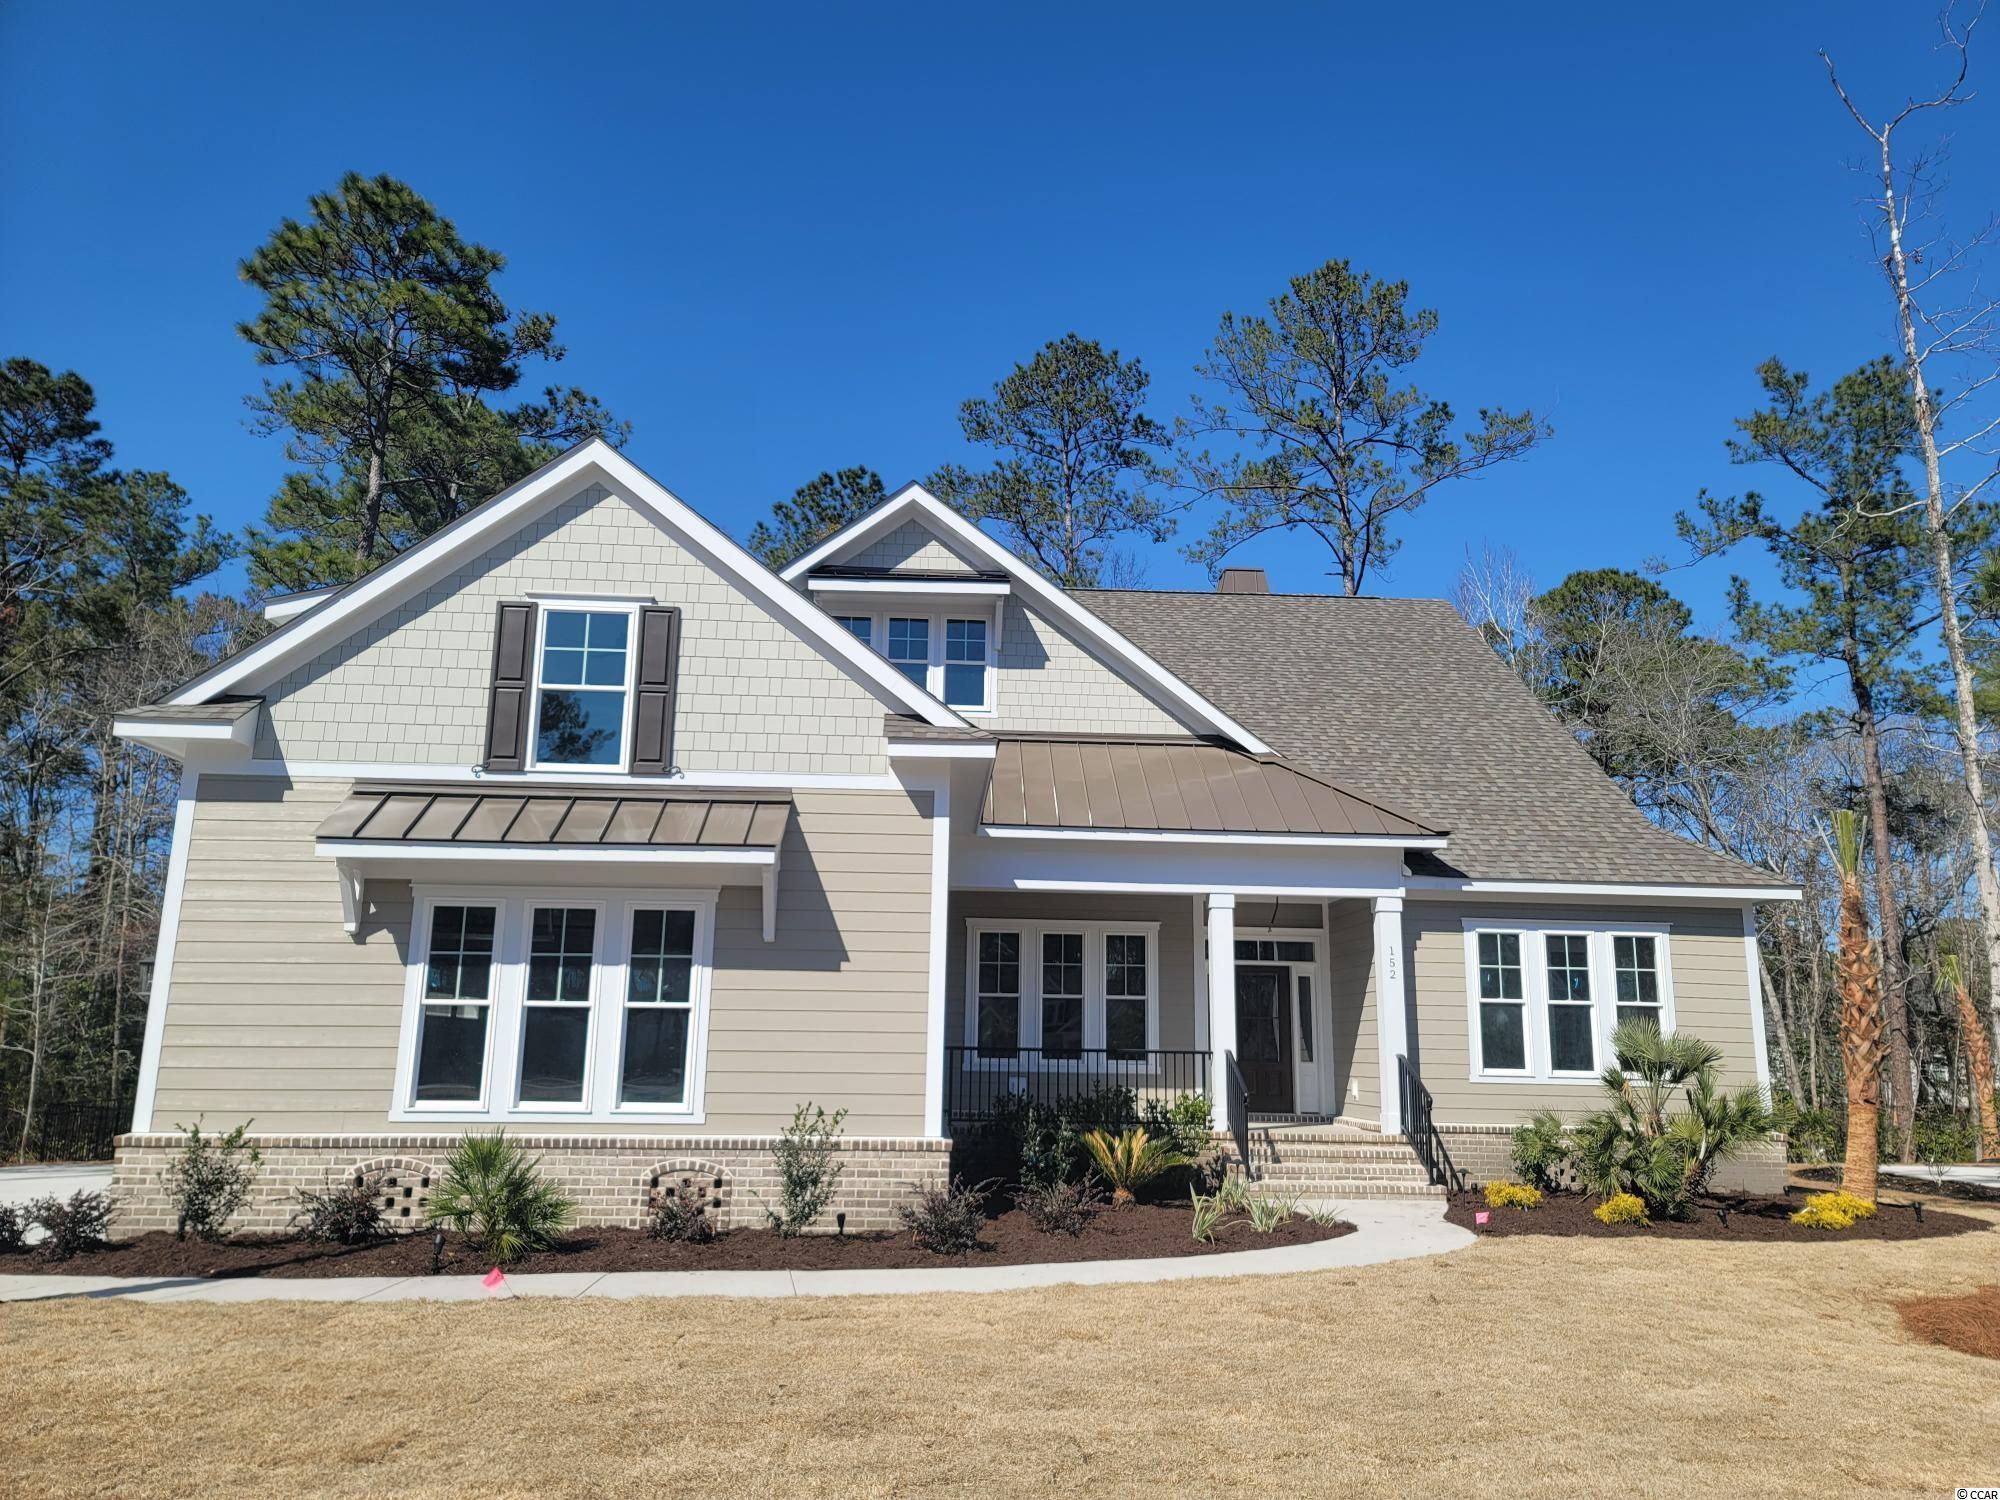 152 Woody Point Dr. Murrells Inlet, SC 29576